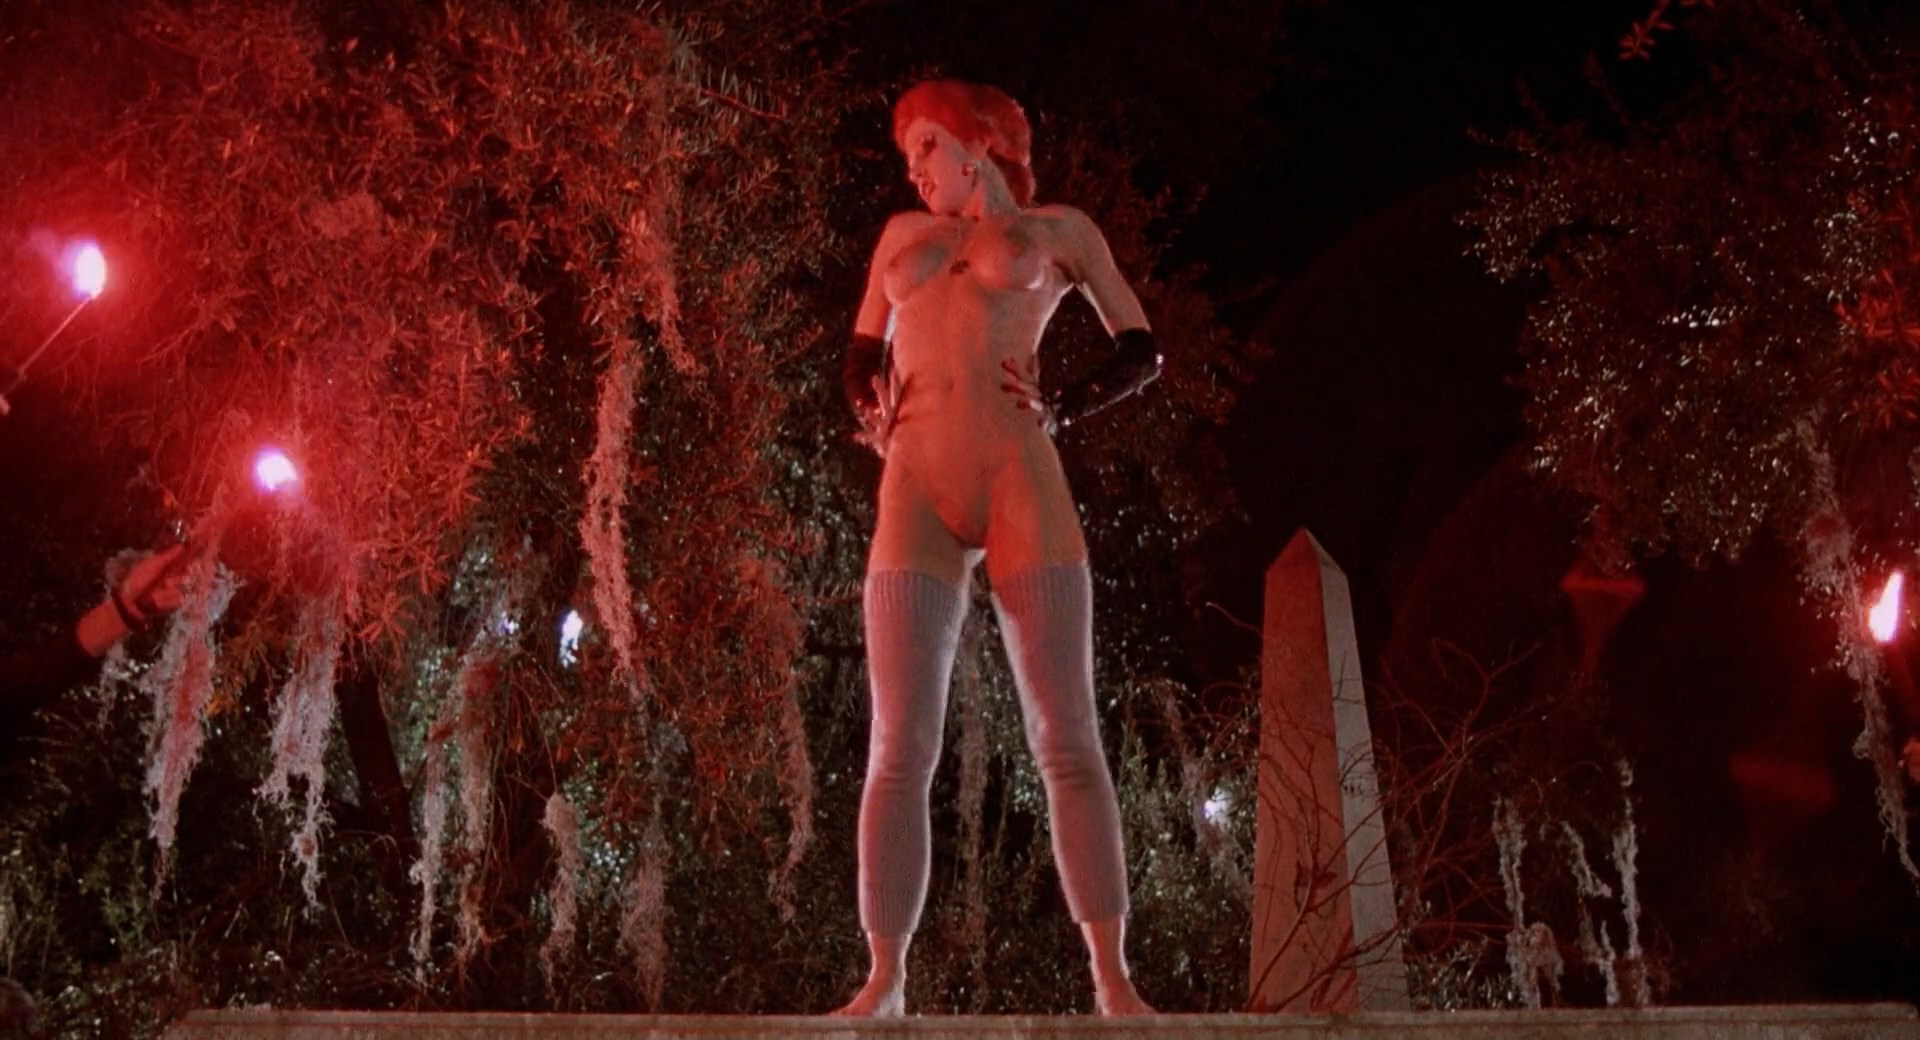 Linnea Quigley is nude in the movie “Return of the Living Dead” which was.....